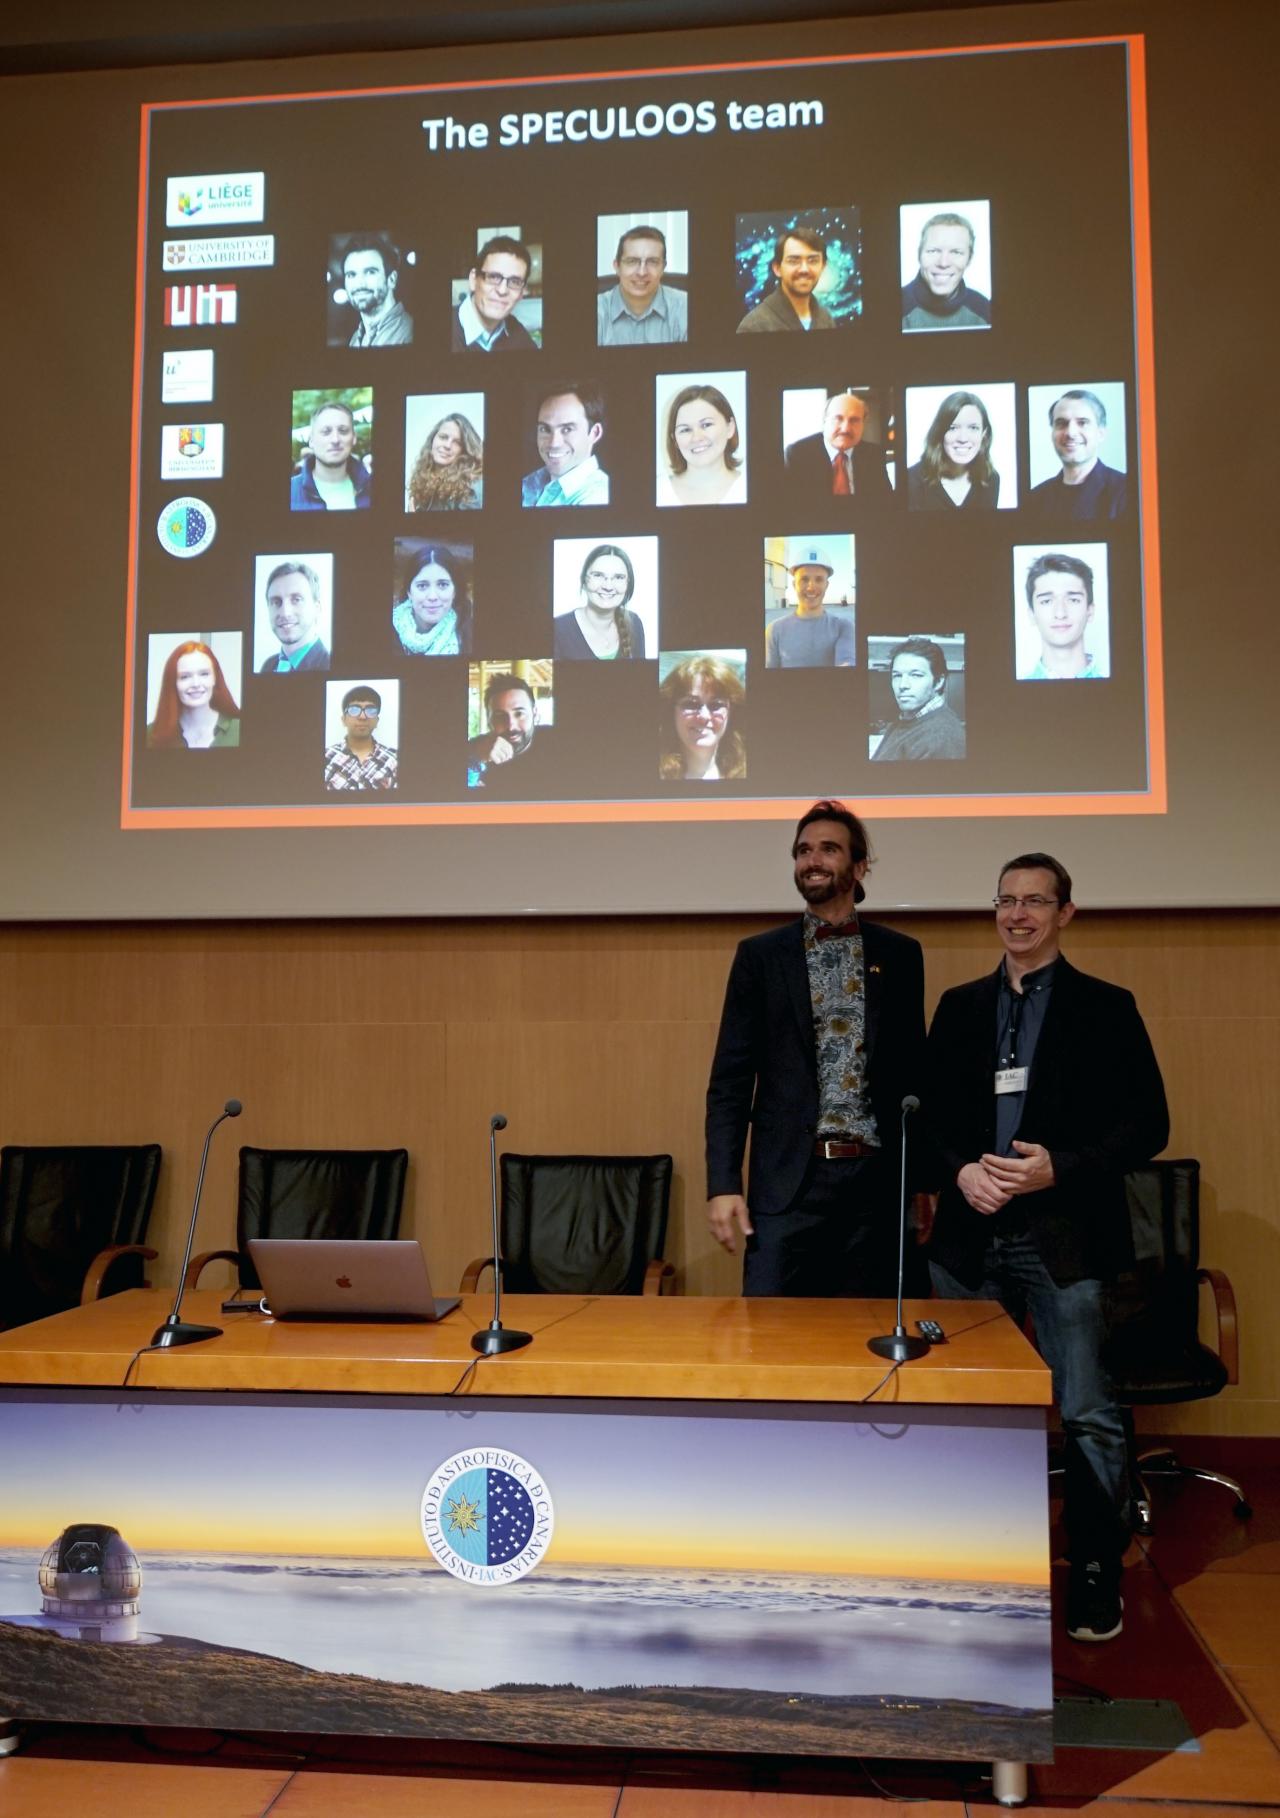 Michael Gillon and Julien de Wit, present the team that makes up the Speculoos telescope network, during the talks prior to the inauguration of Artemis. 